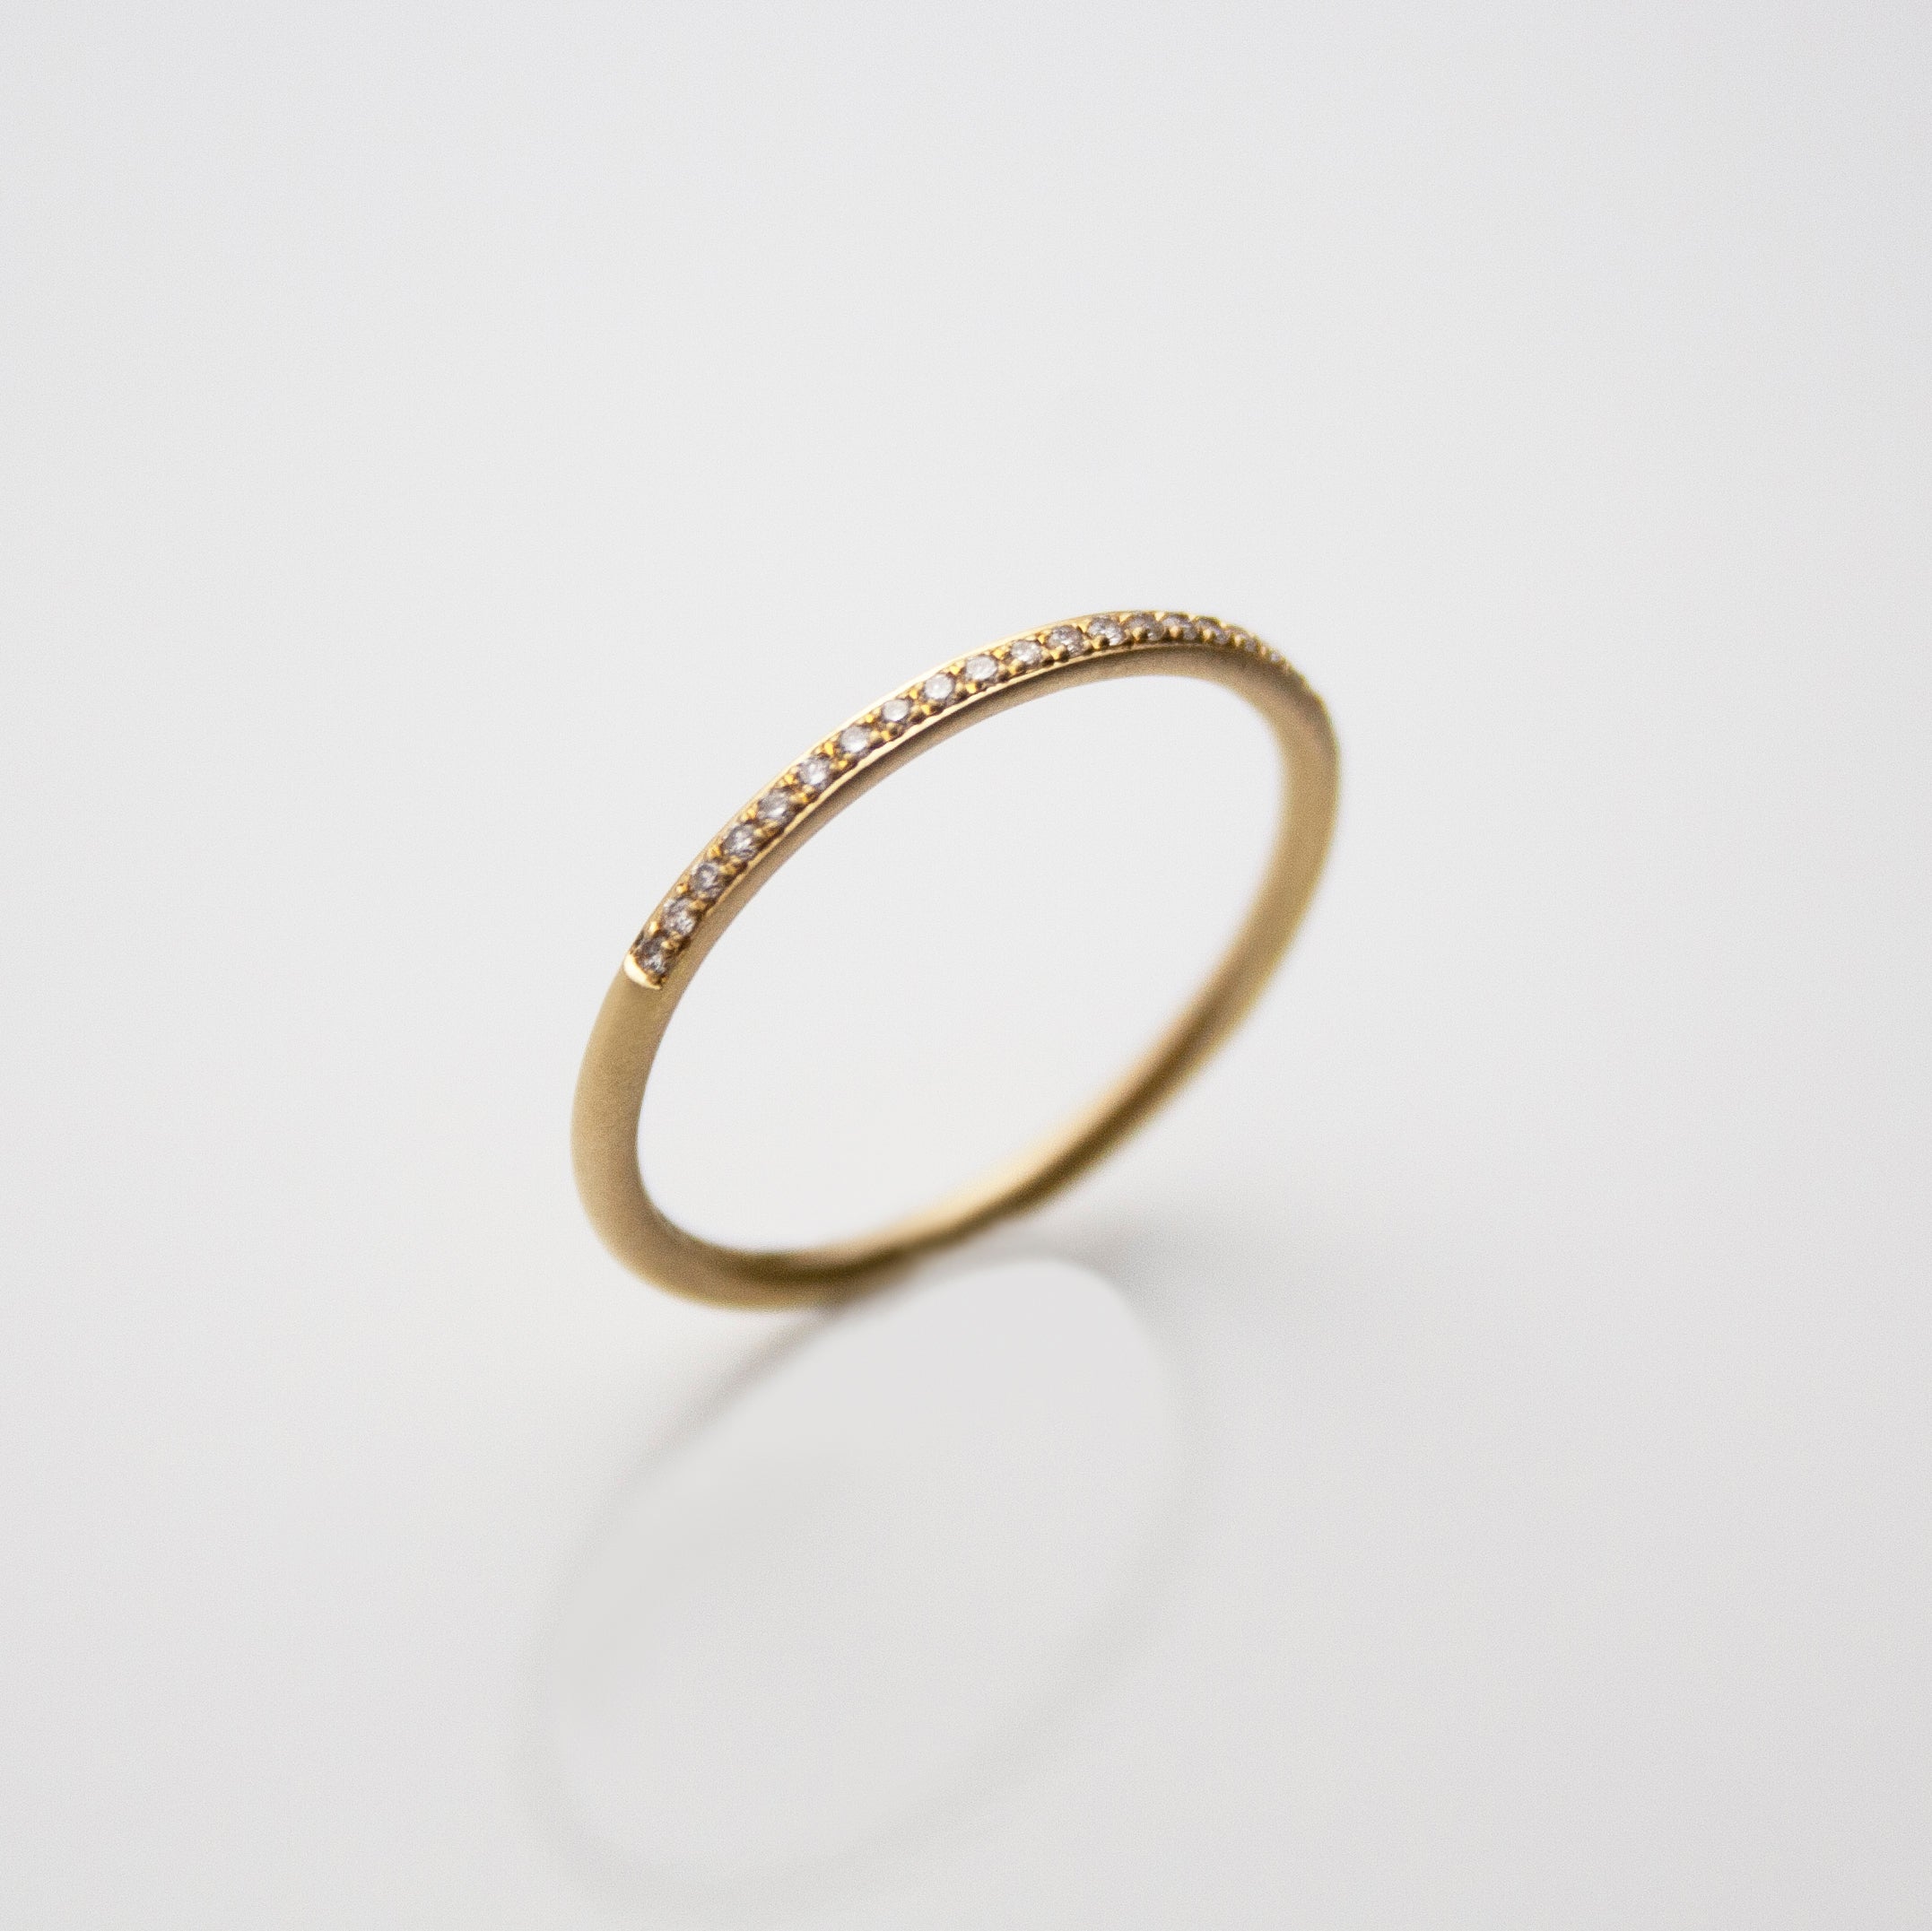 Fine 18ct. Gold and Diamond Band